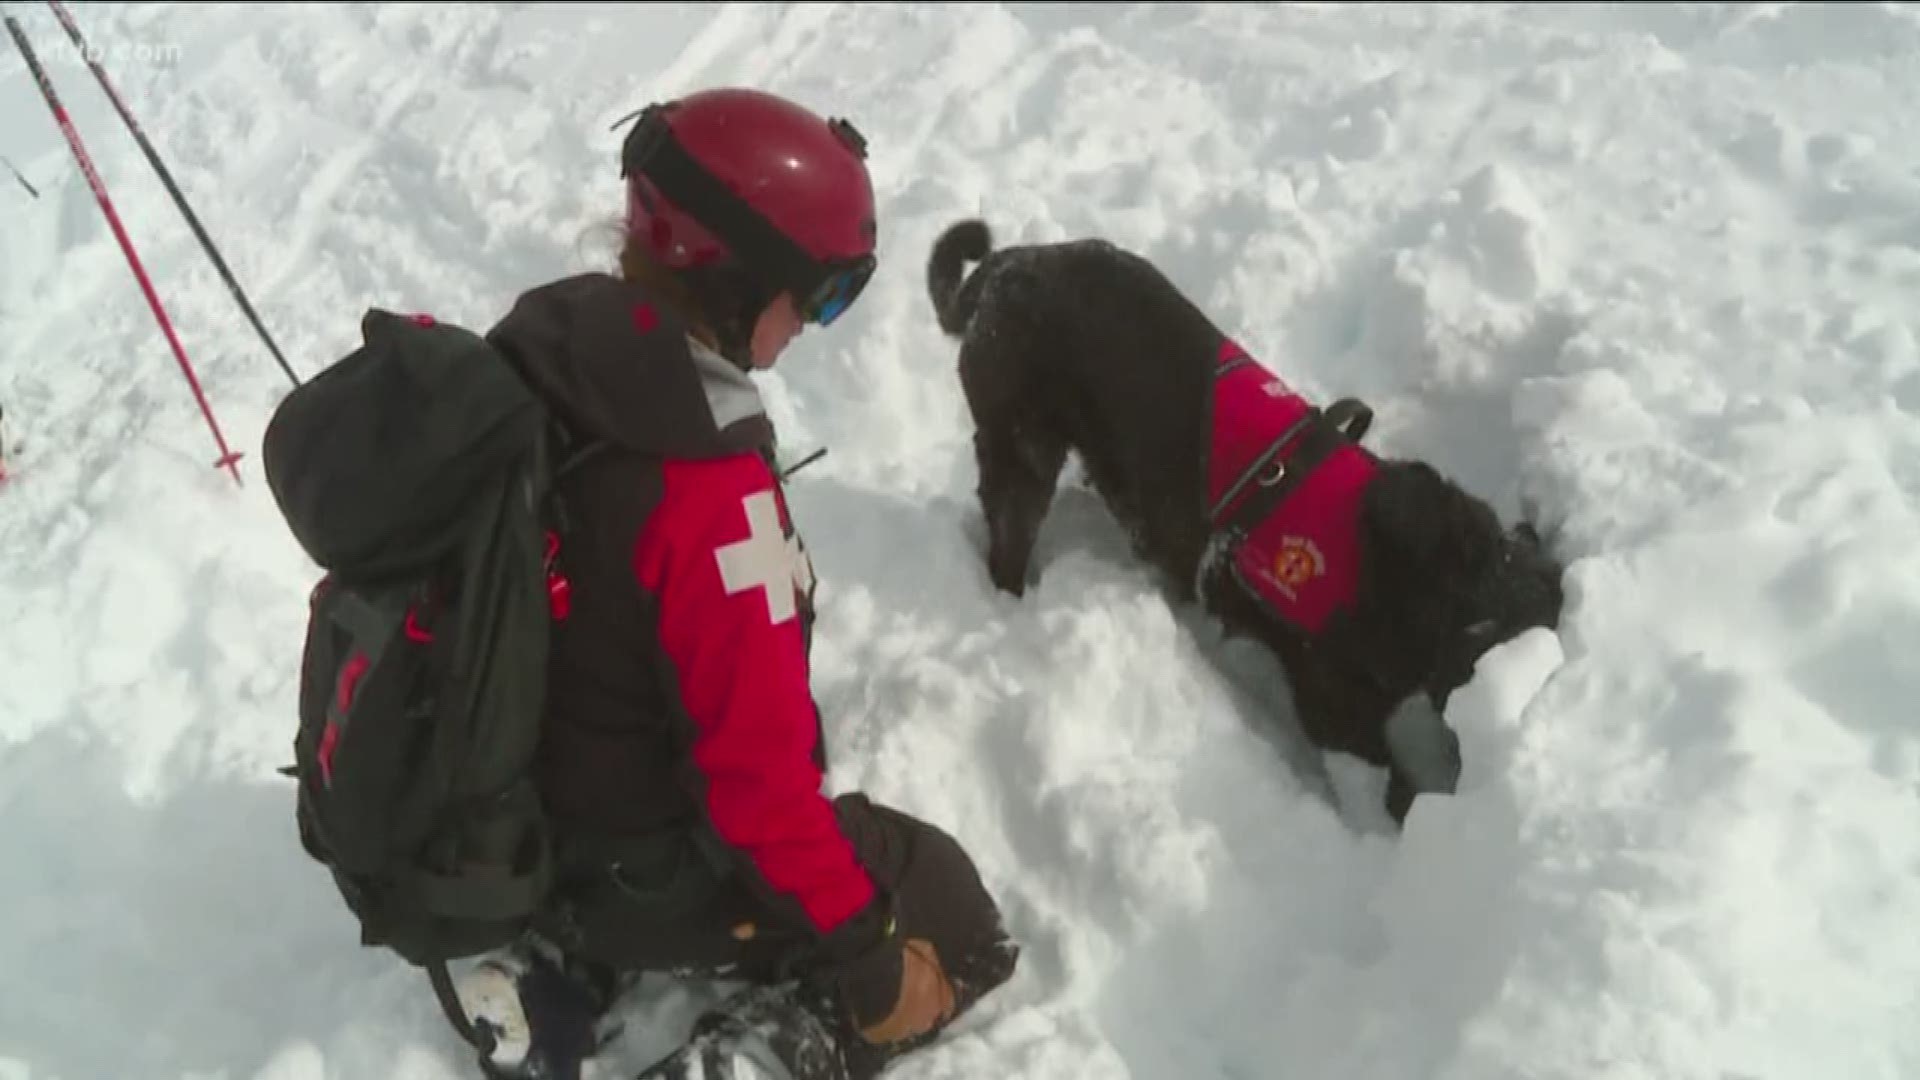 Blaze and Kobi and their avalanche teams constantly train for the worst, but for the dogs, rescuing people is all part of a game.